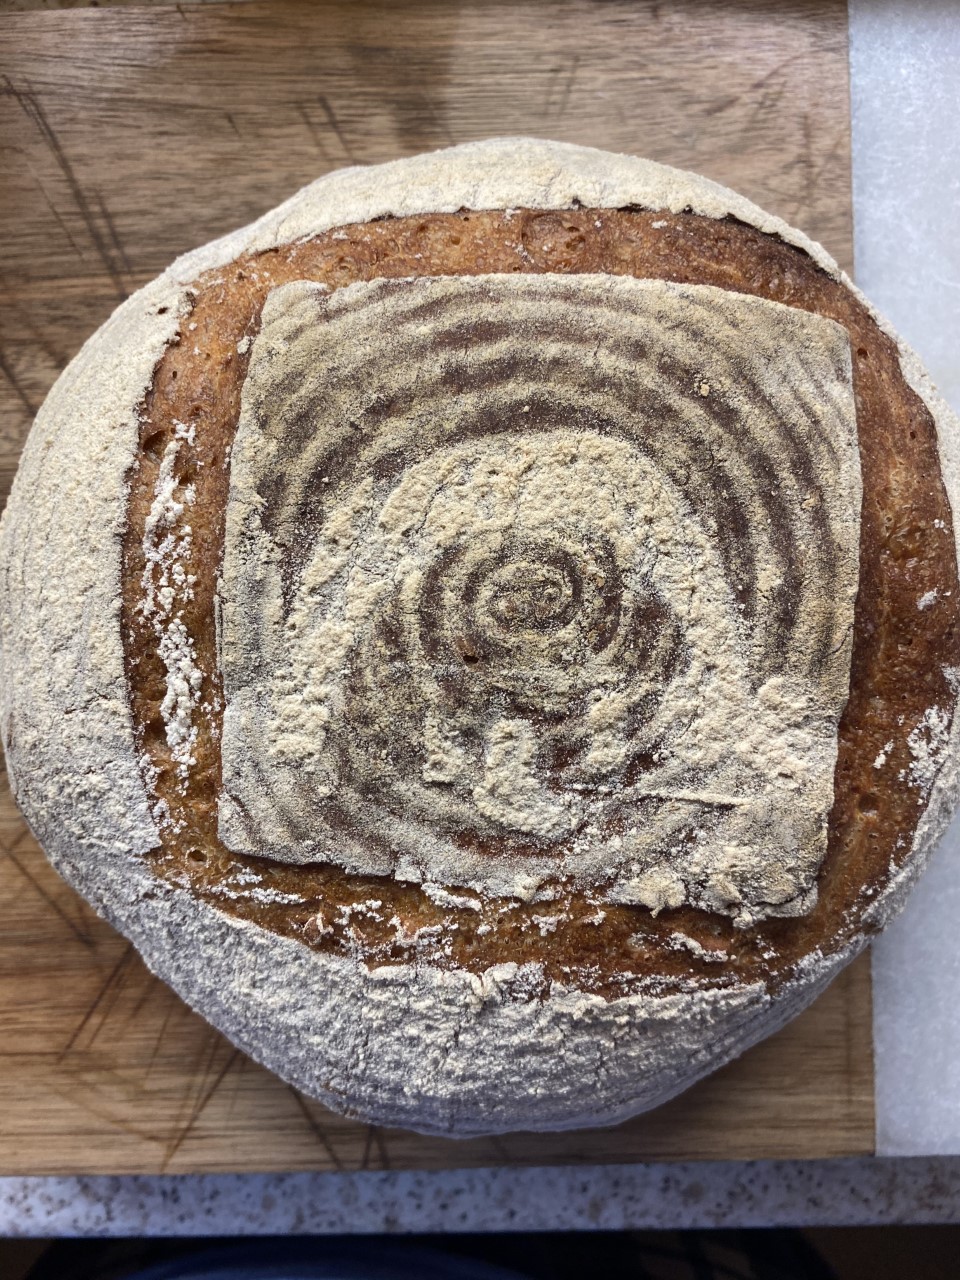 Picture winner of the month, Igloo themed bread.